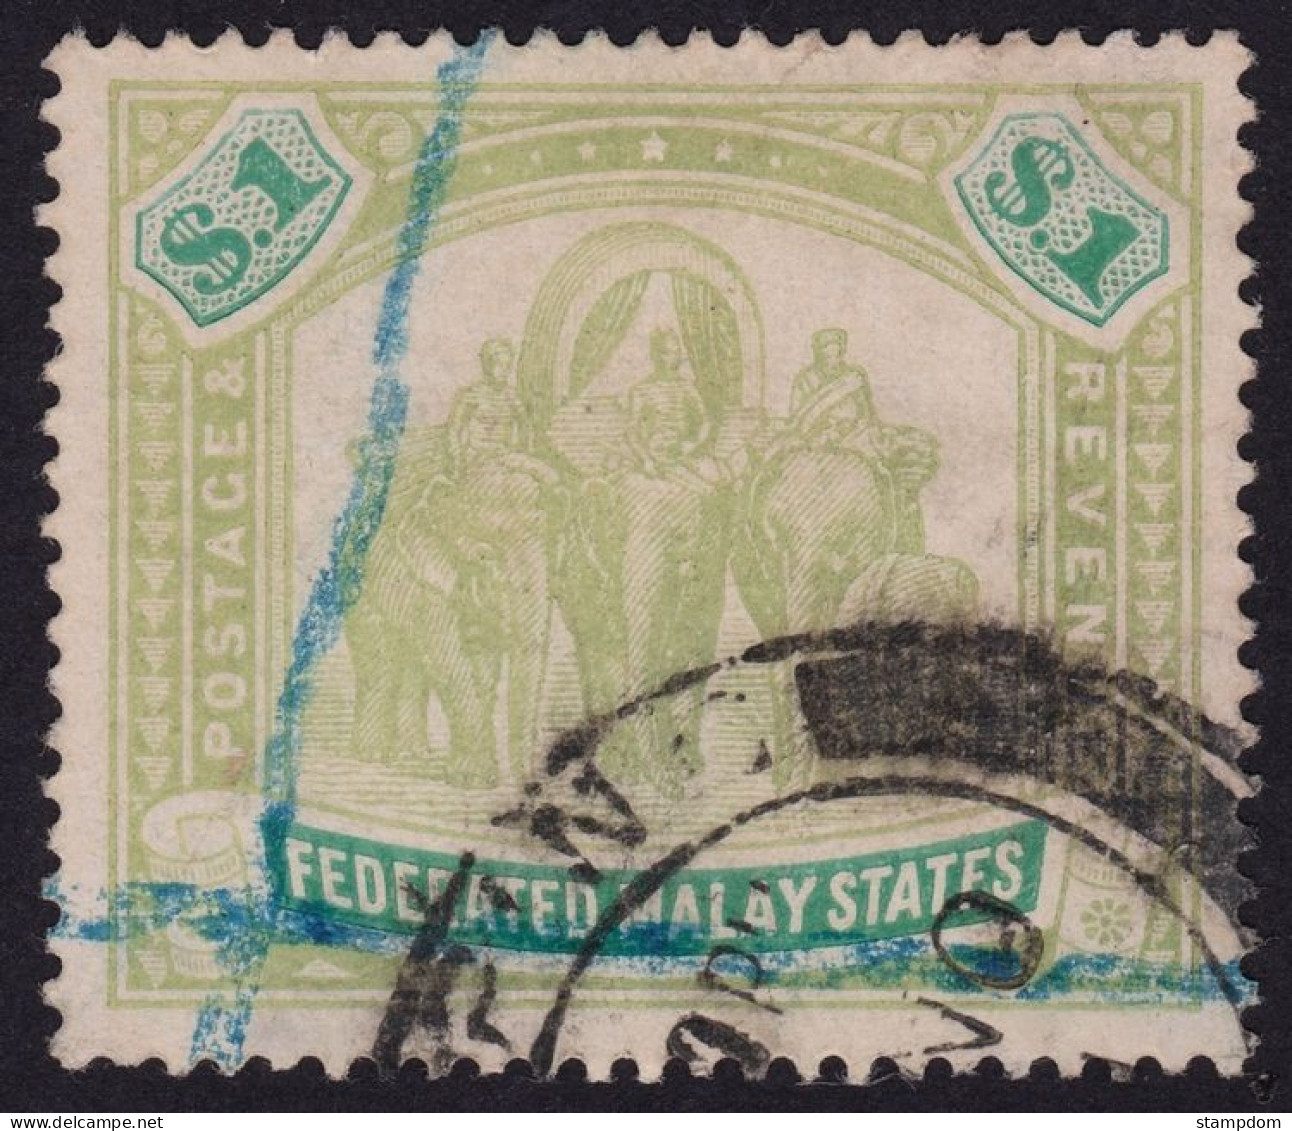 FEDERATED MALAY STATES FMS 1907 $1 Wmk.MCA Sc#34 - USED CDS / Washed @TE261 - Federated Malay States